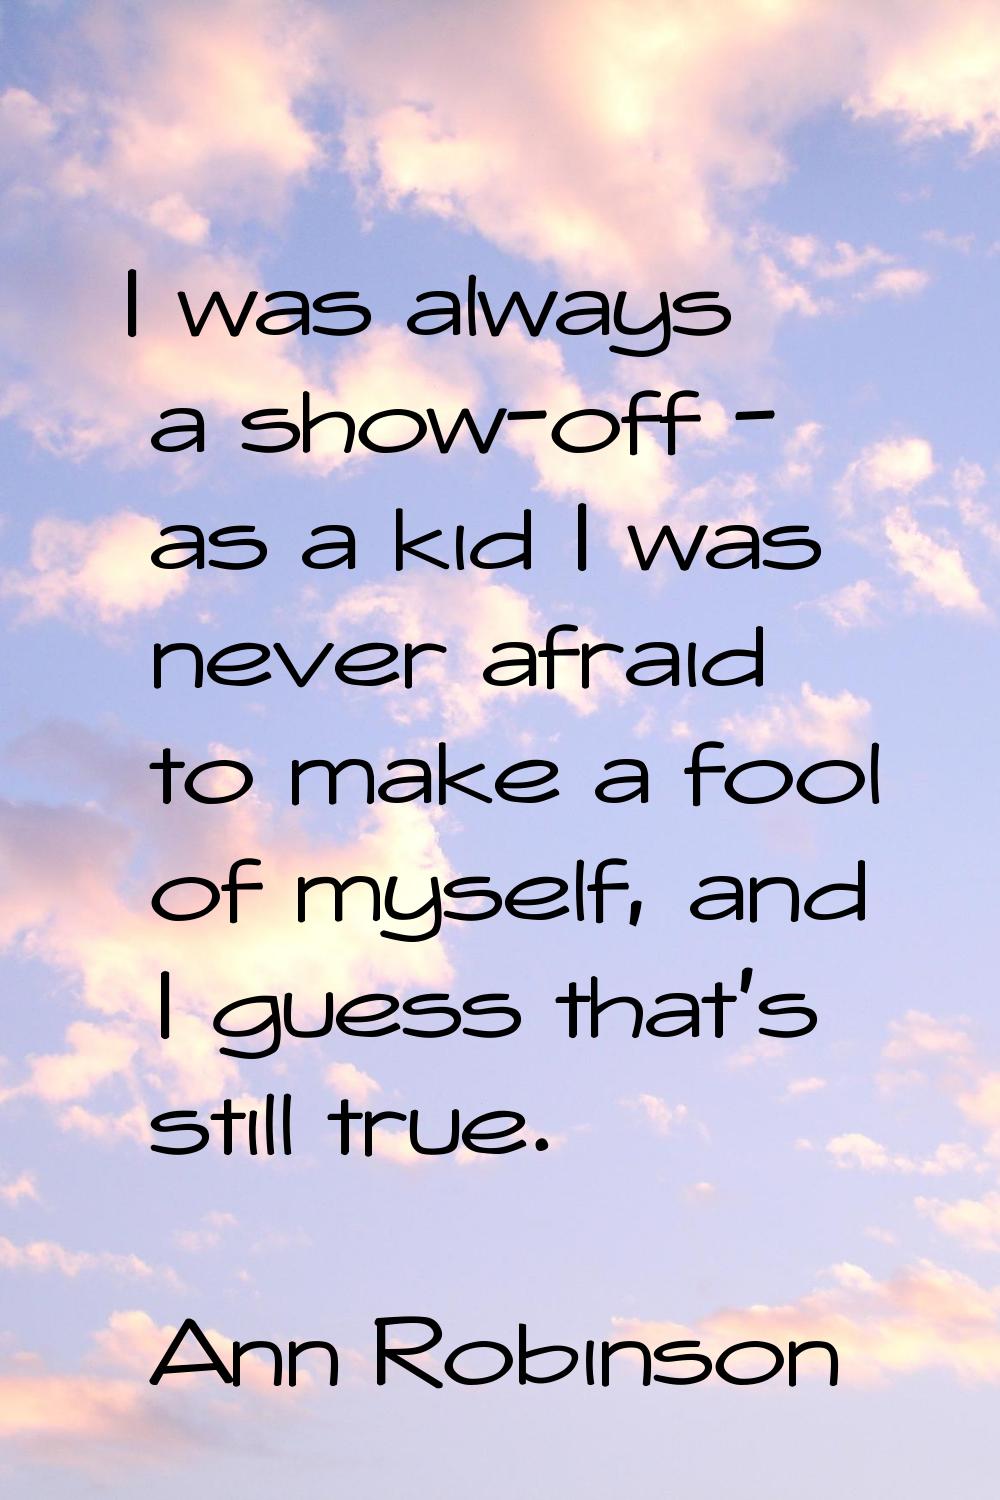 I was always a show-off - as a kid I was never afraid to make a fool of myself, and I guess that's 